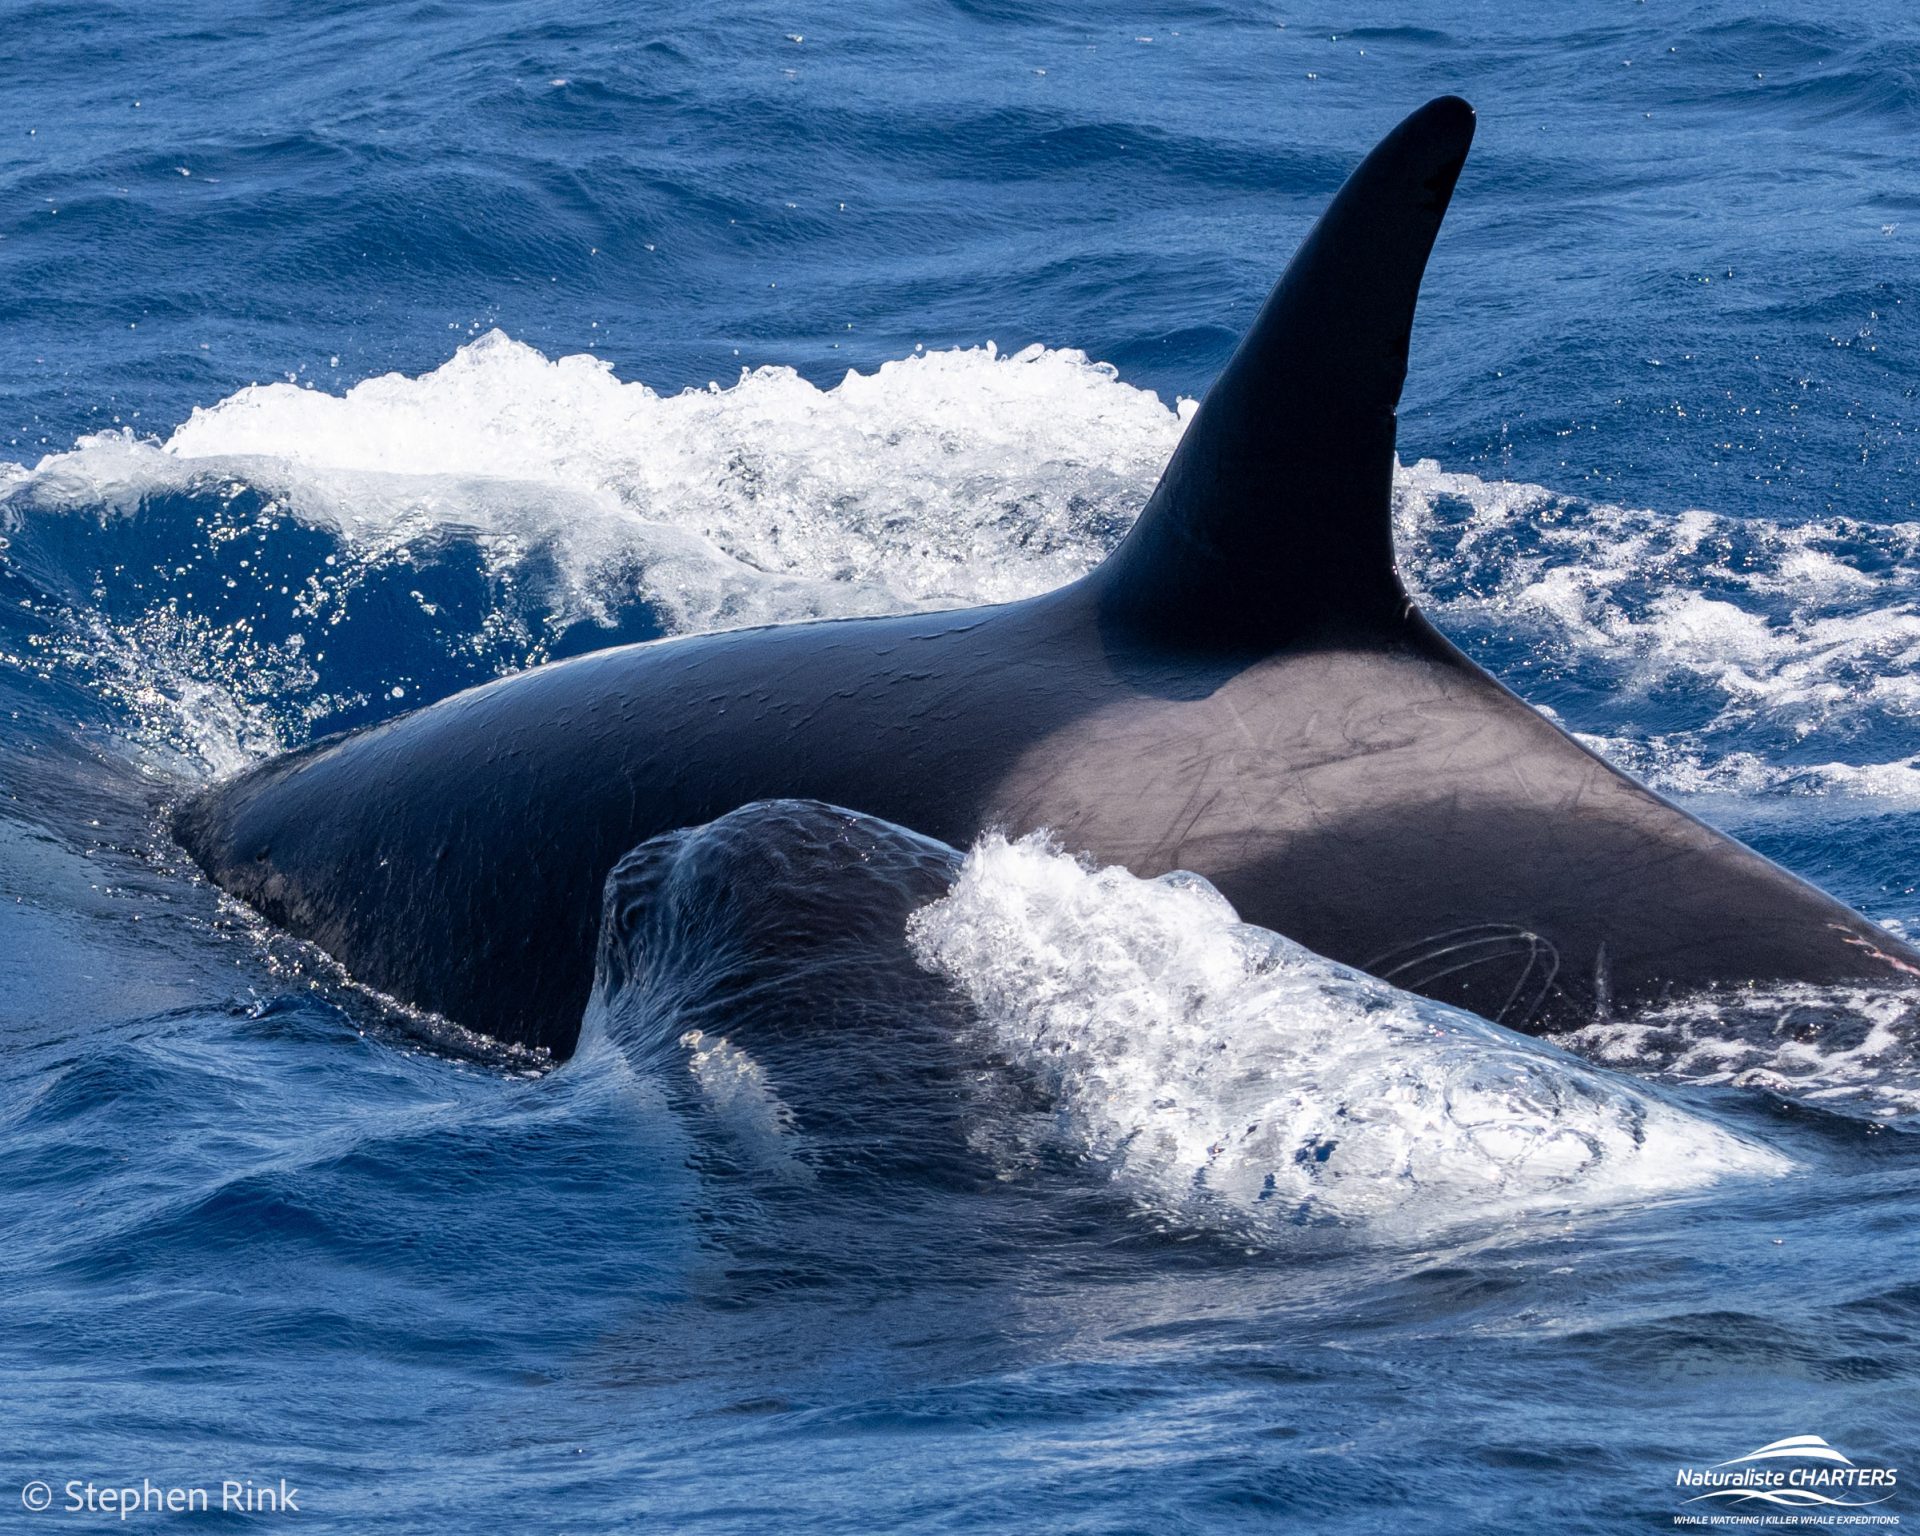 Young calves are usually accompanied by another orca